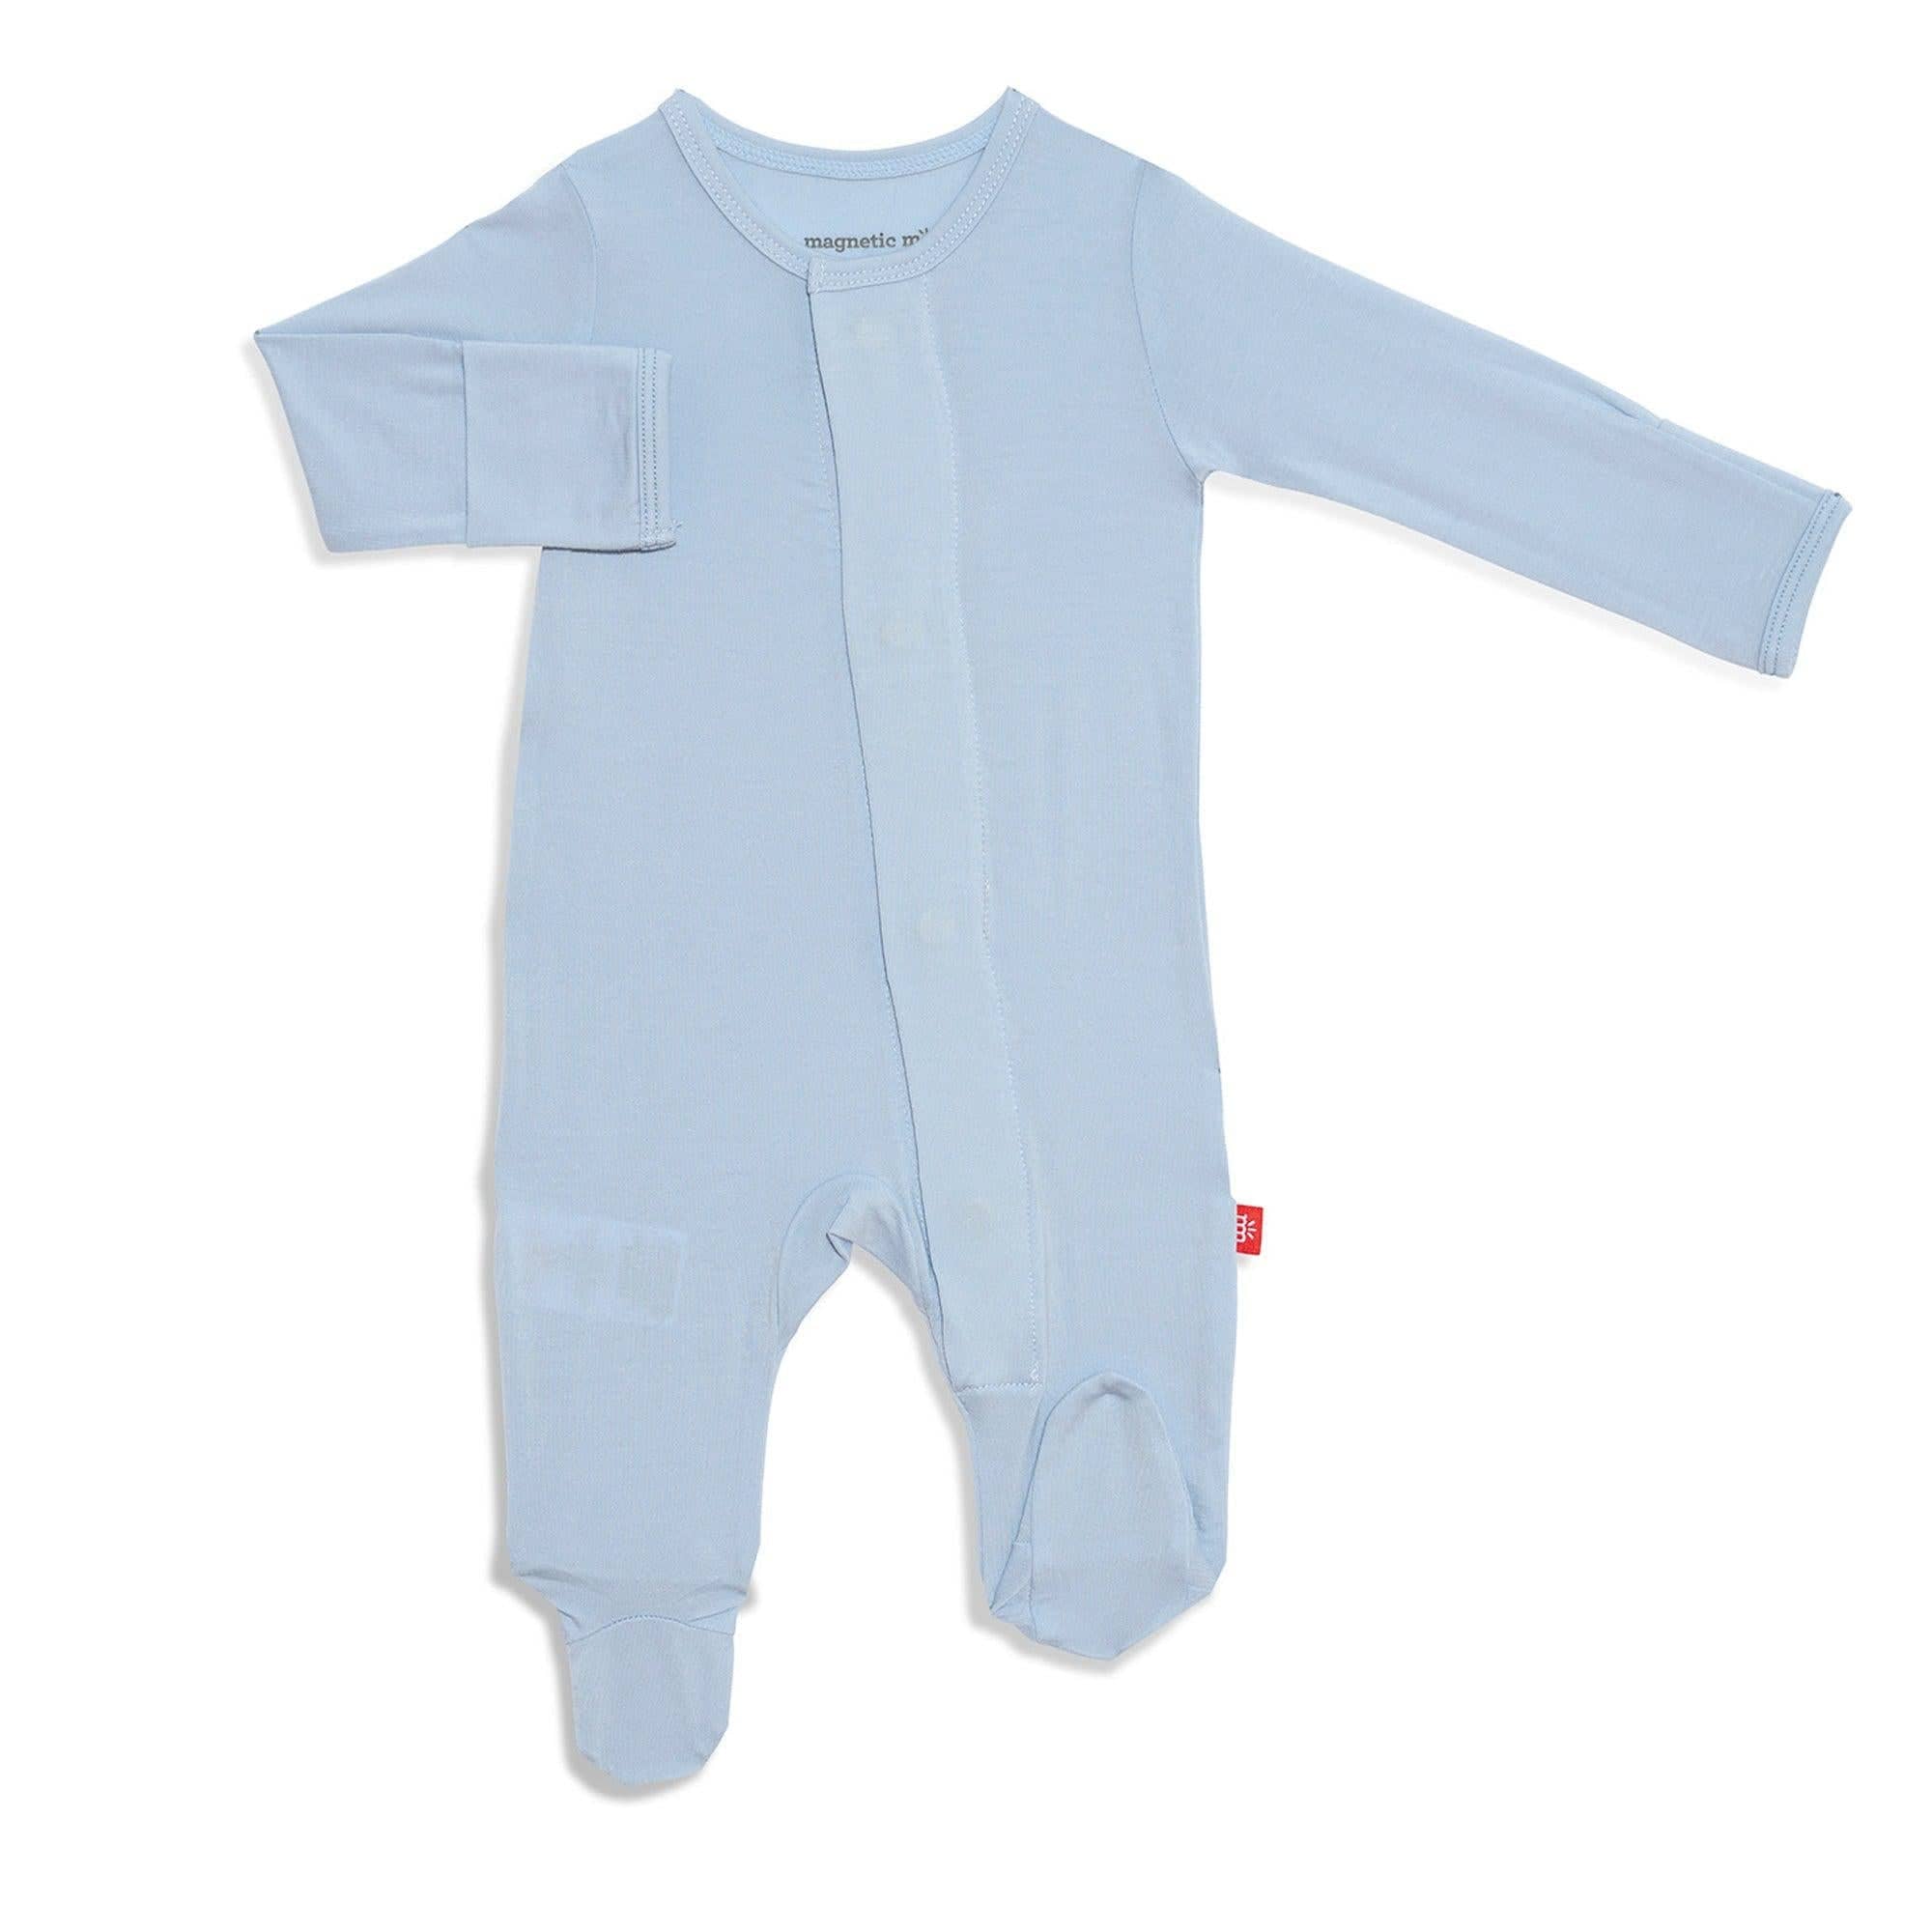 Modal Magnetic Footie - Baby Blue